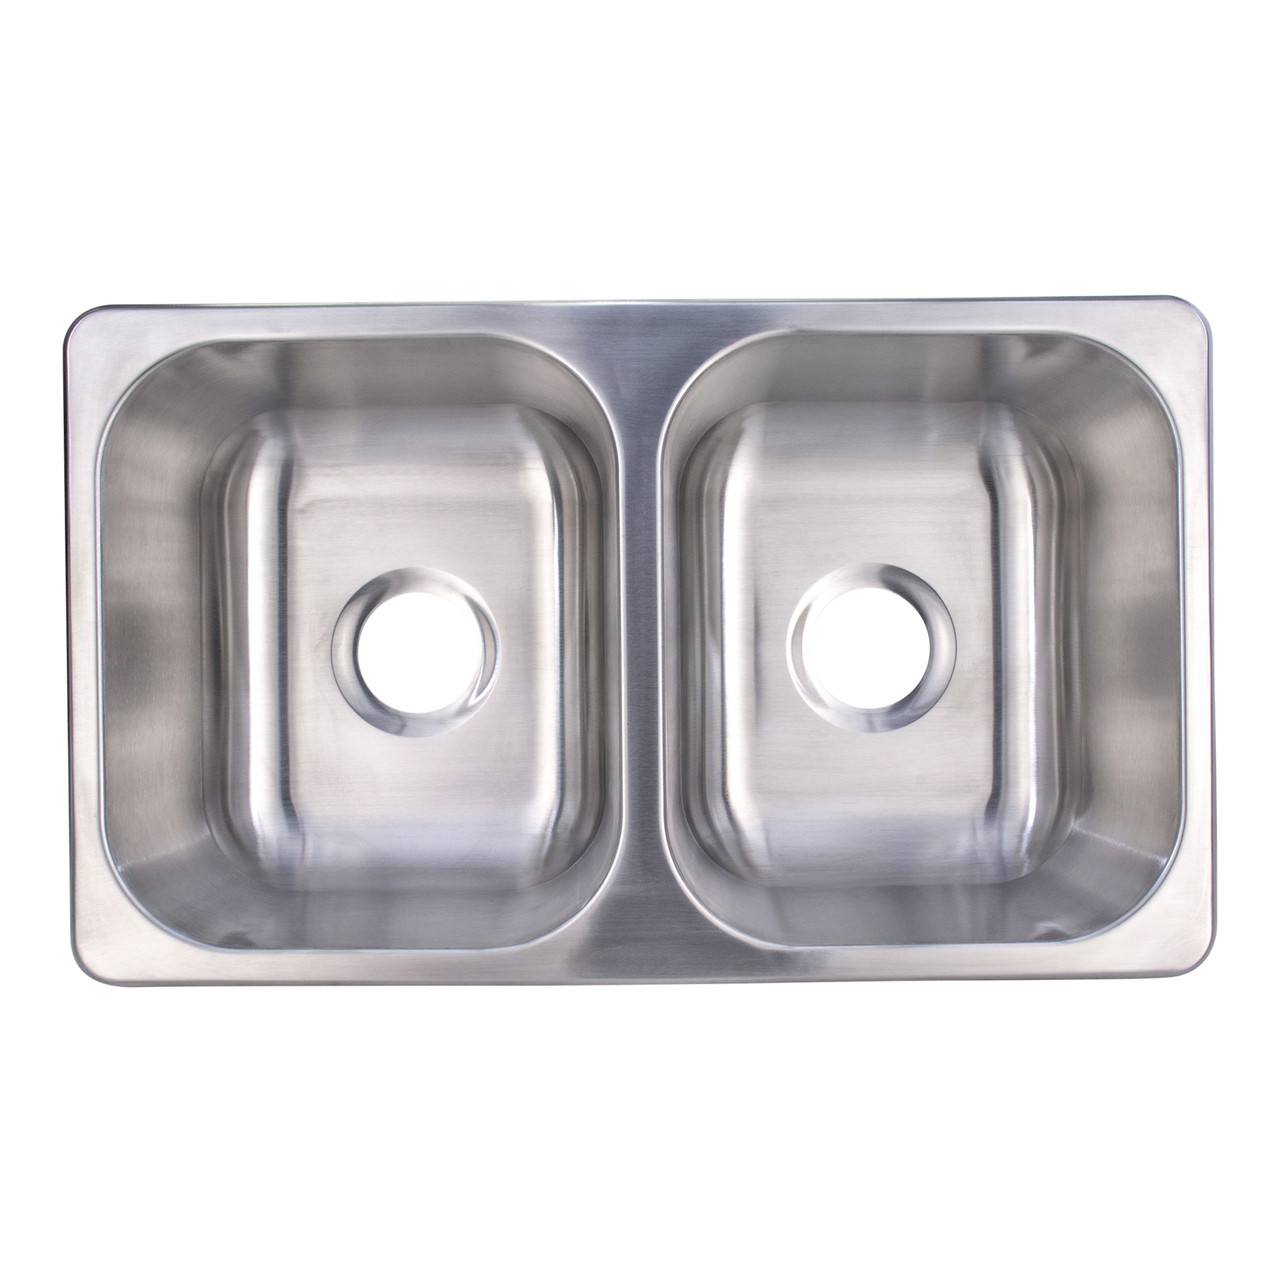 Double Stainless Steel Rv Sink 27 X 16 X 7 Recpro